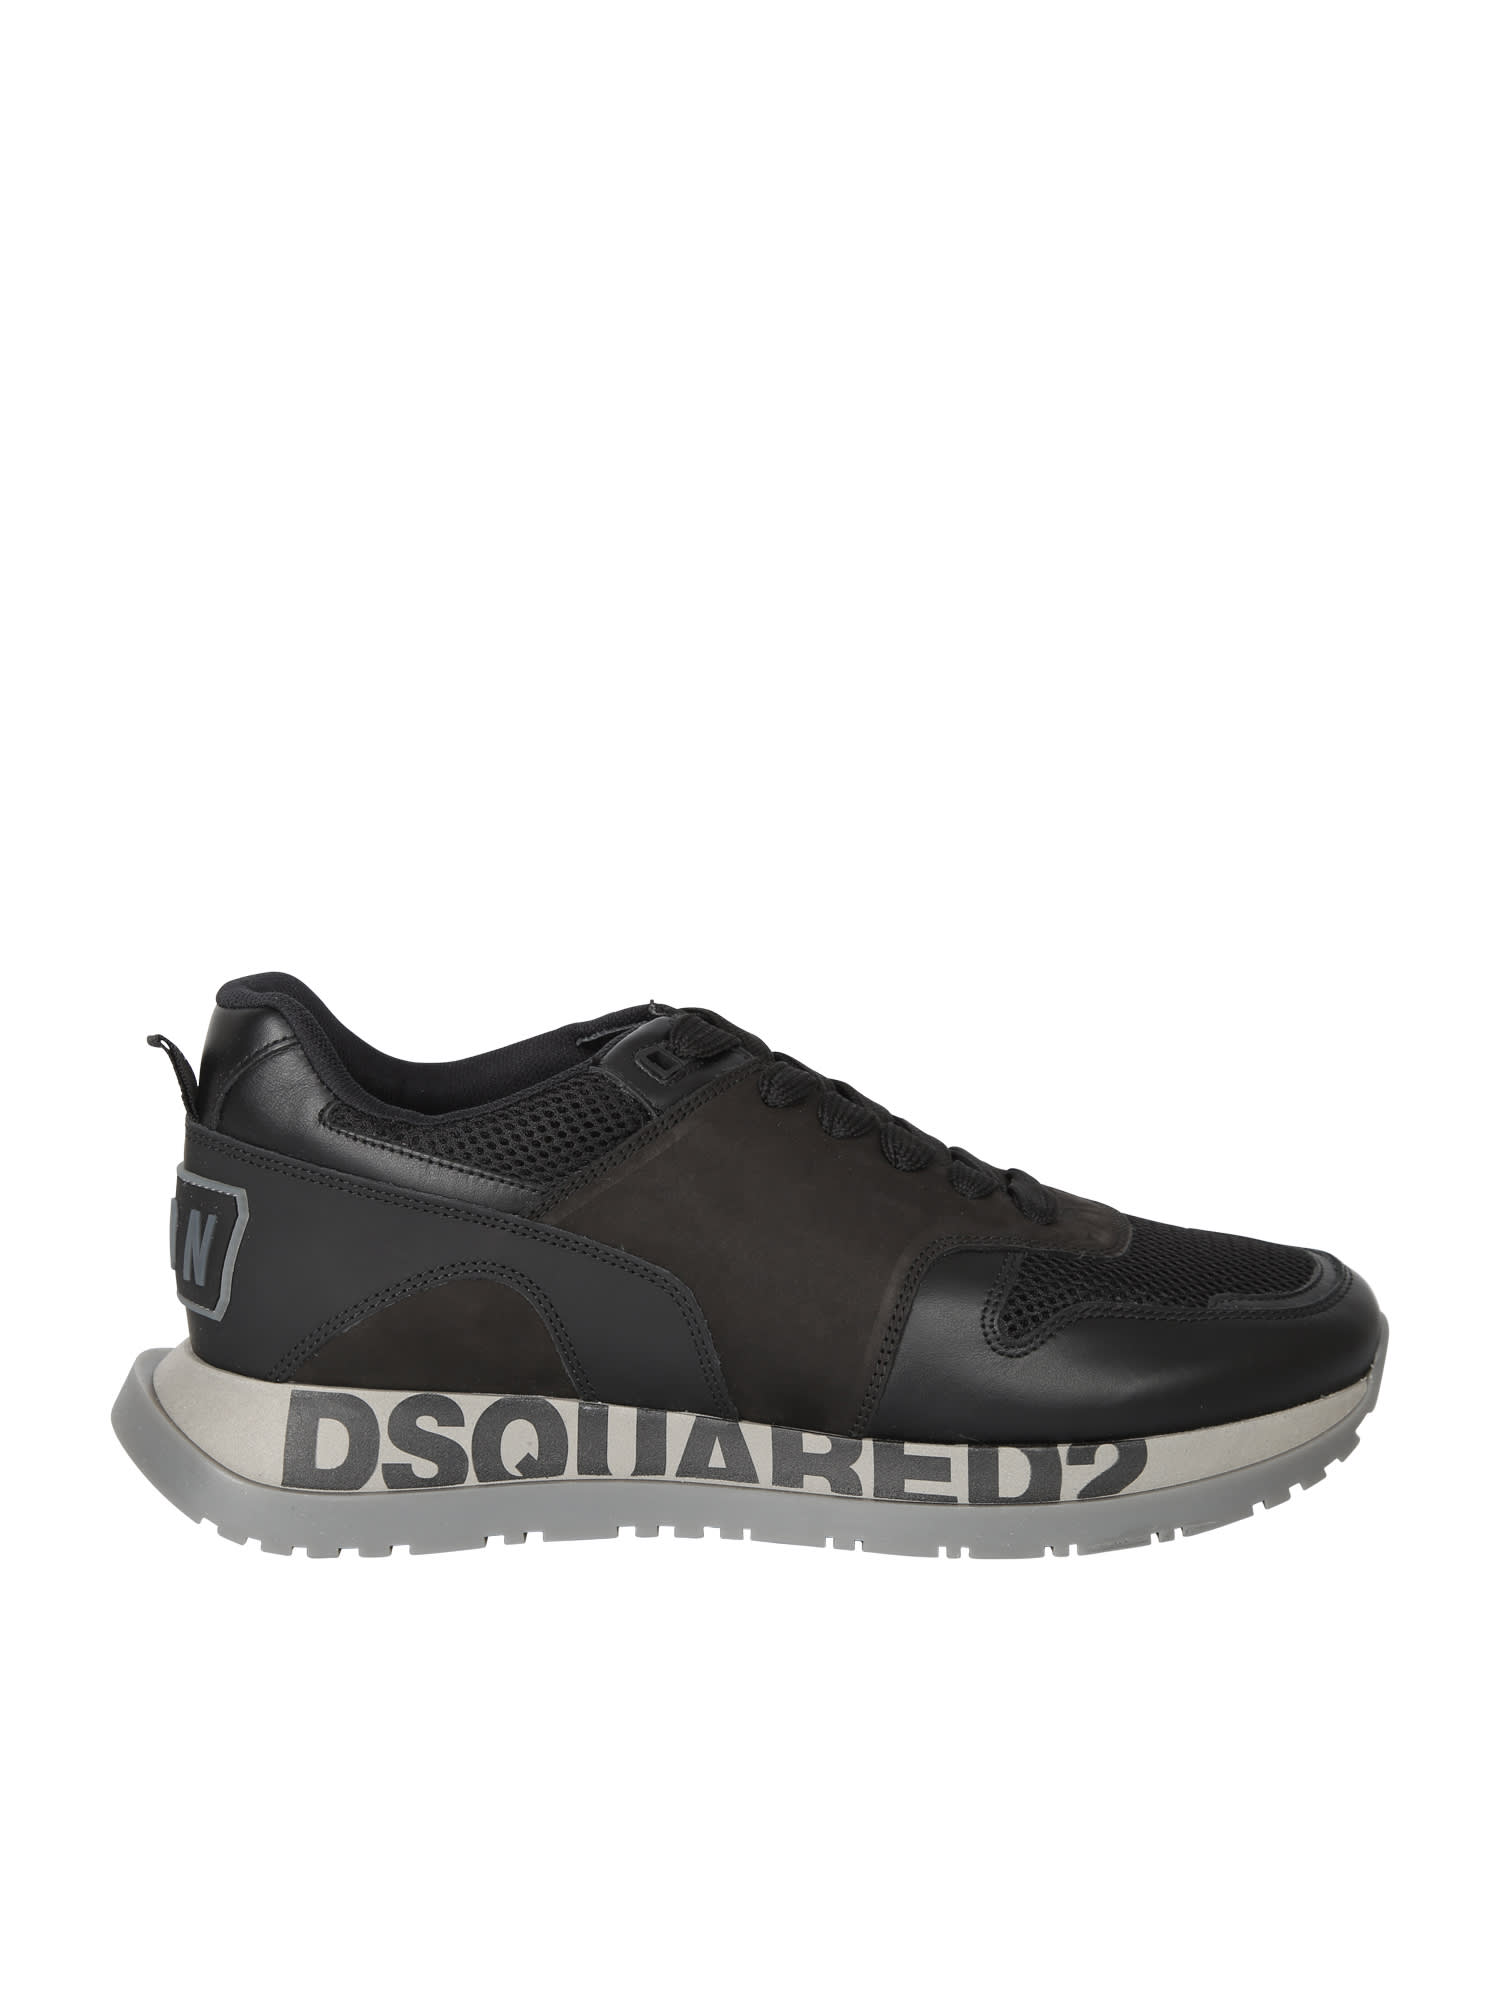 Dsquared2 Branded Sneakers